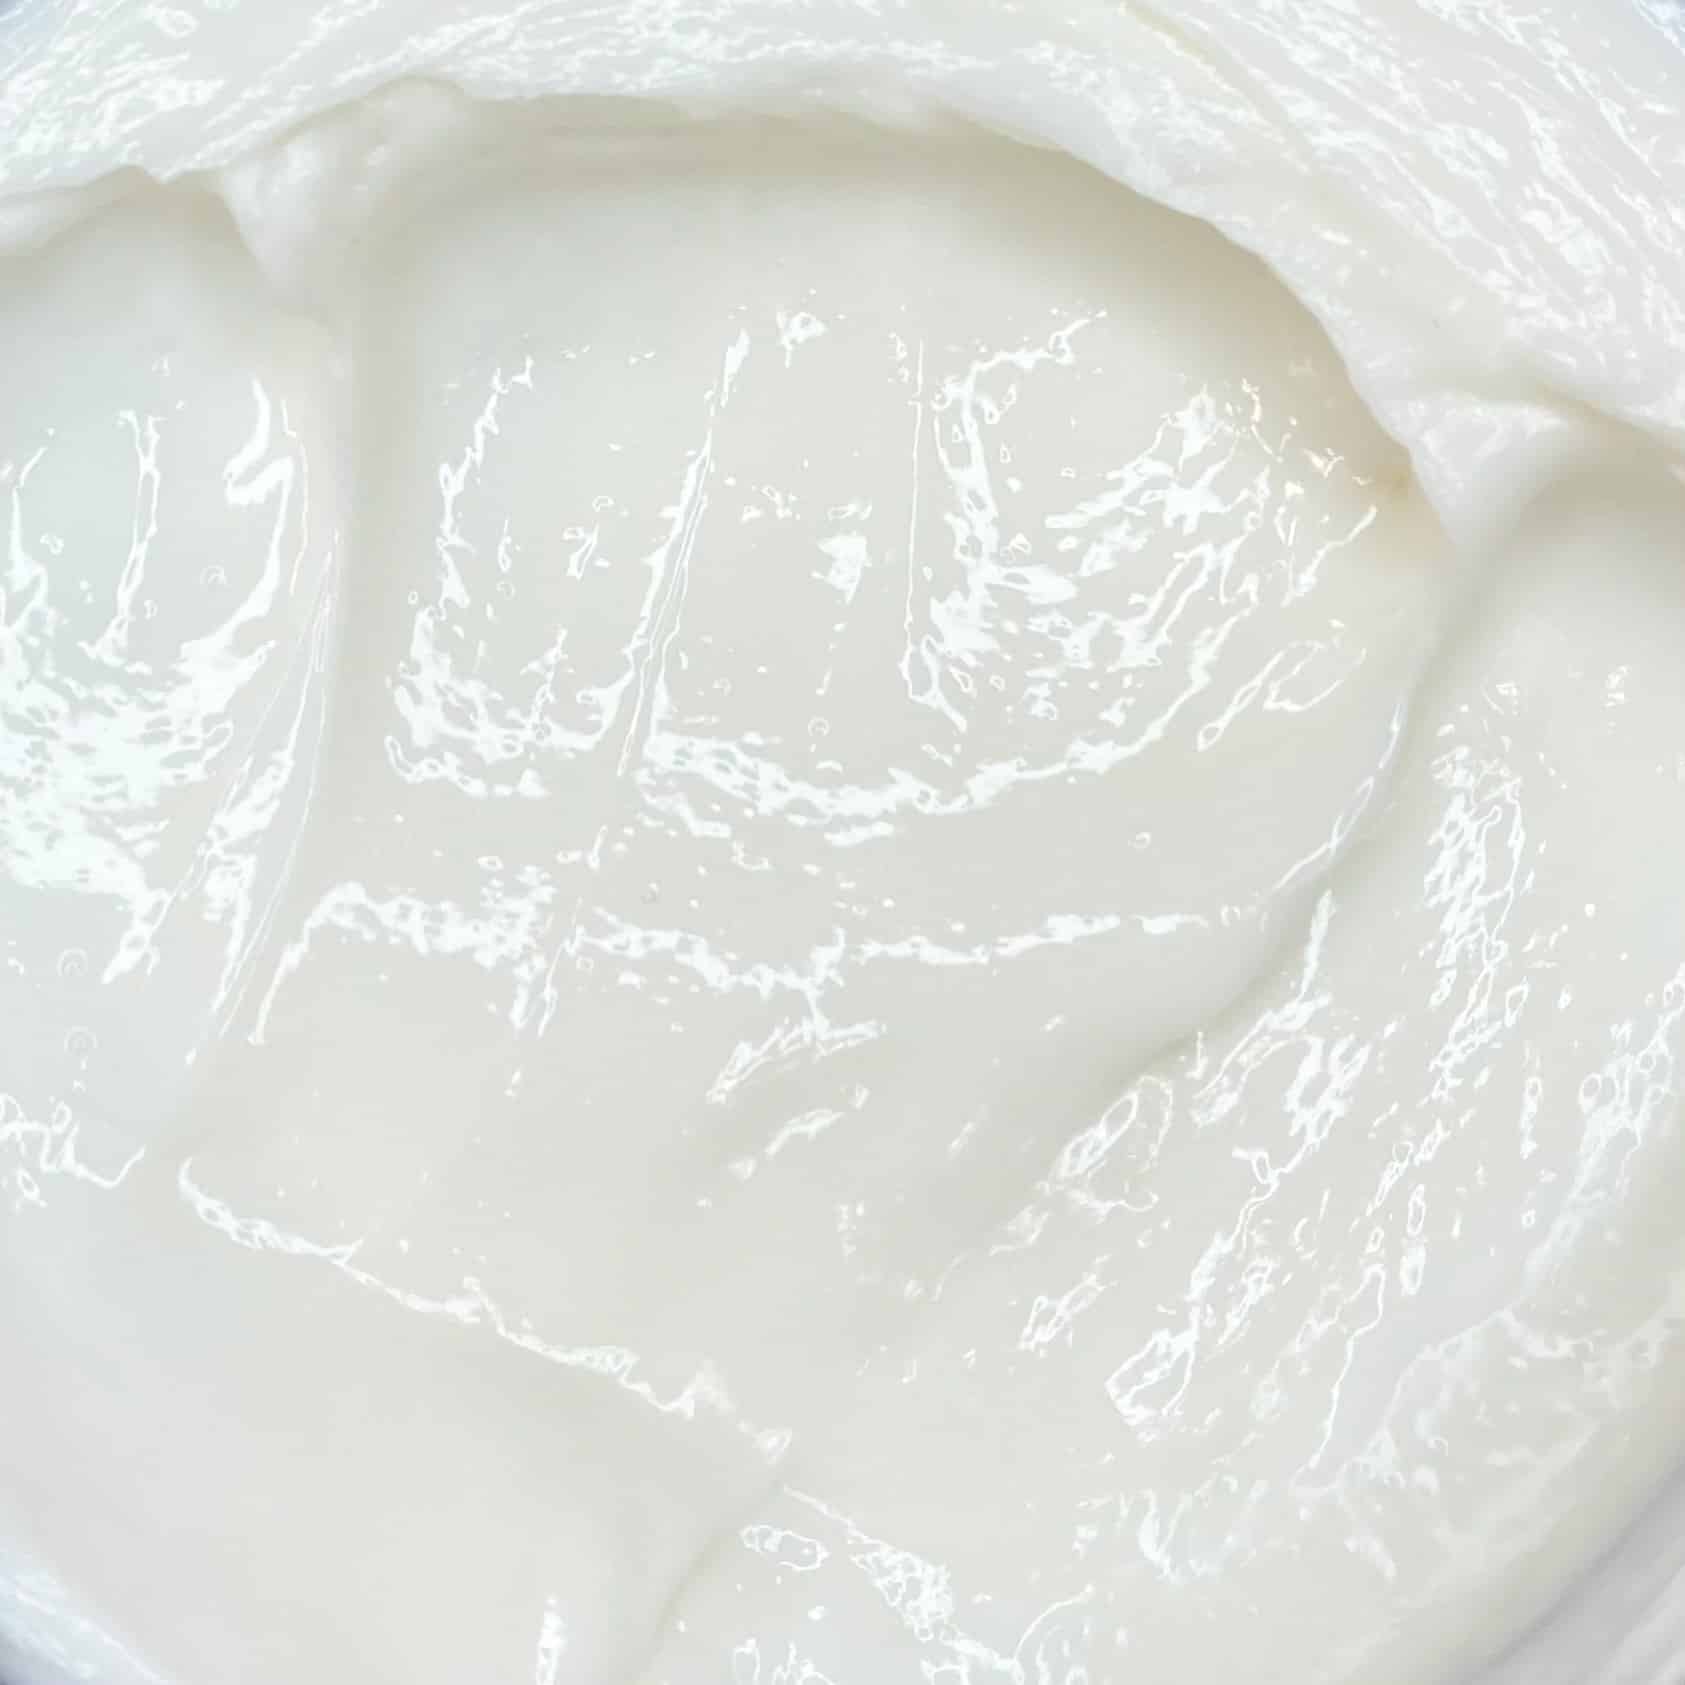 Hair Volume™ Repair Mask product close up showing the creamy texture of the mask